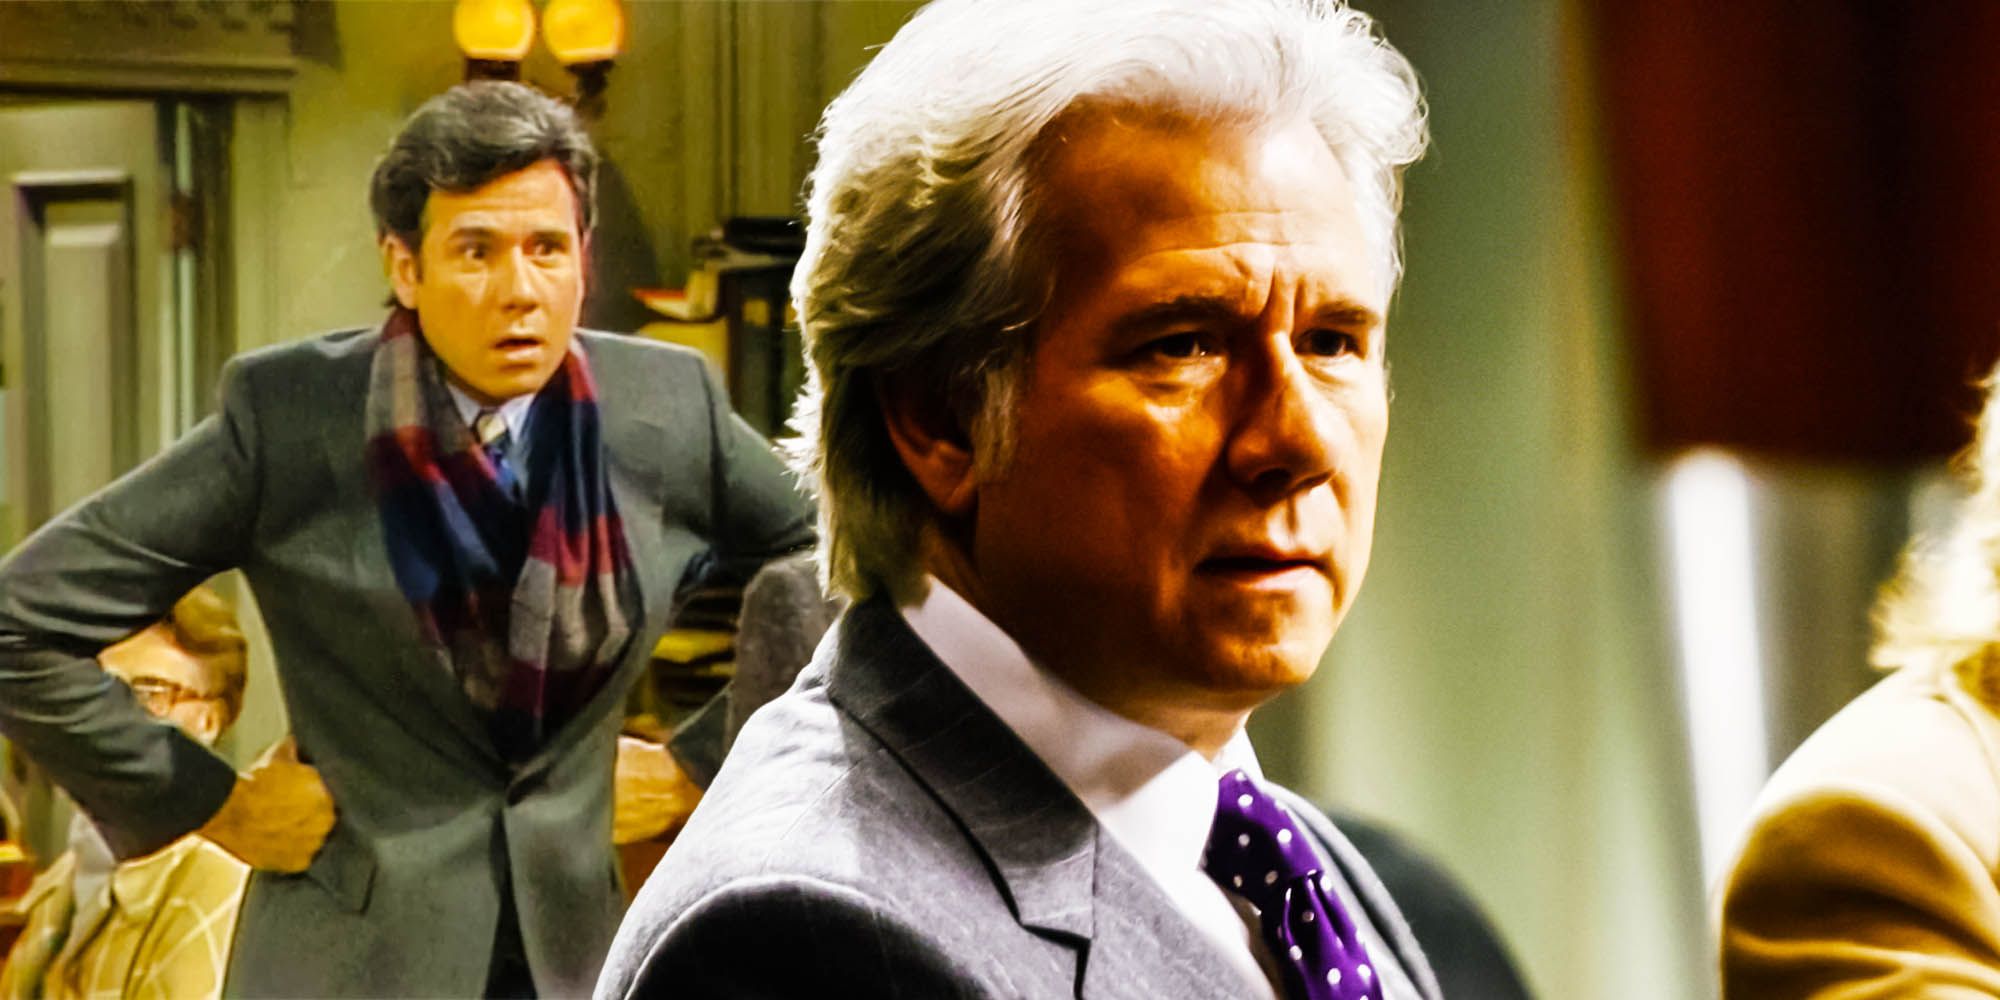 In a New 'Night Court,' John Larroquette Plays Defense - The New